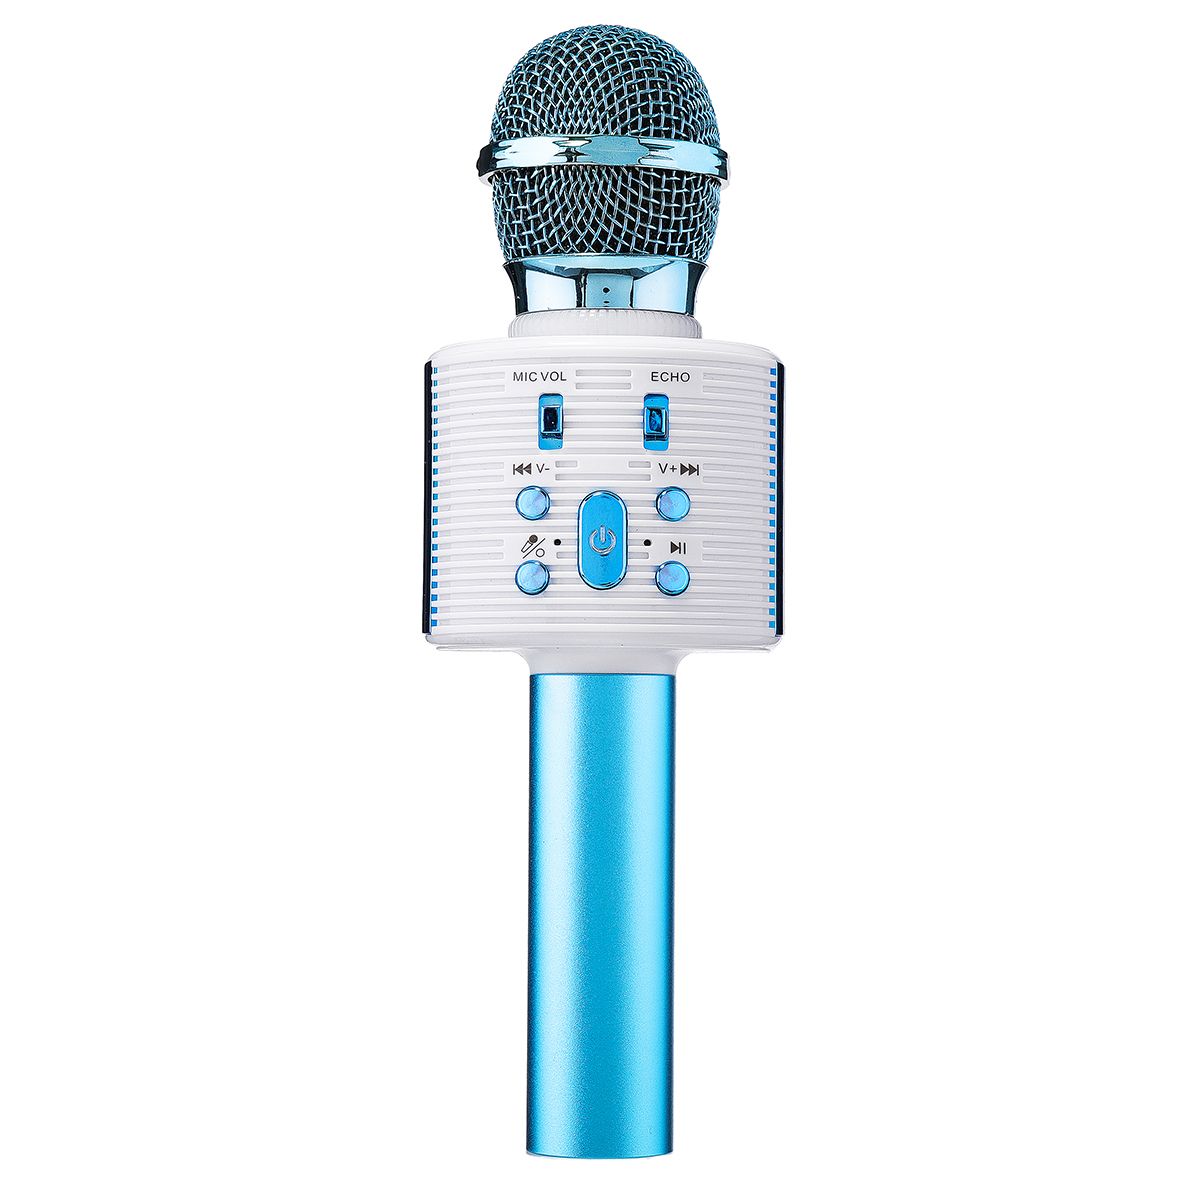 V6-bluetooth-Microphone-for-Android-IOS-Mobile-Phone-KTV-Live-Broadcast-Mic-Speaker-1484308